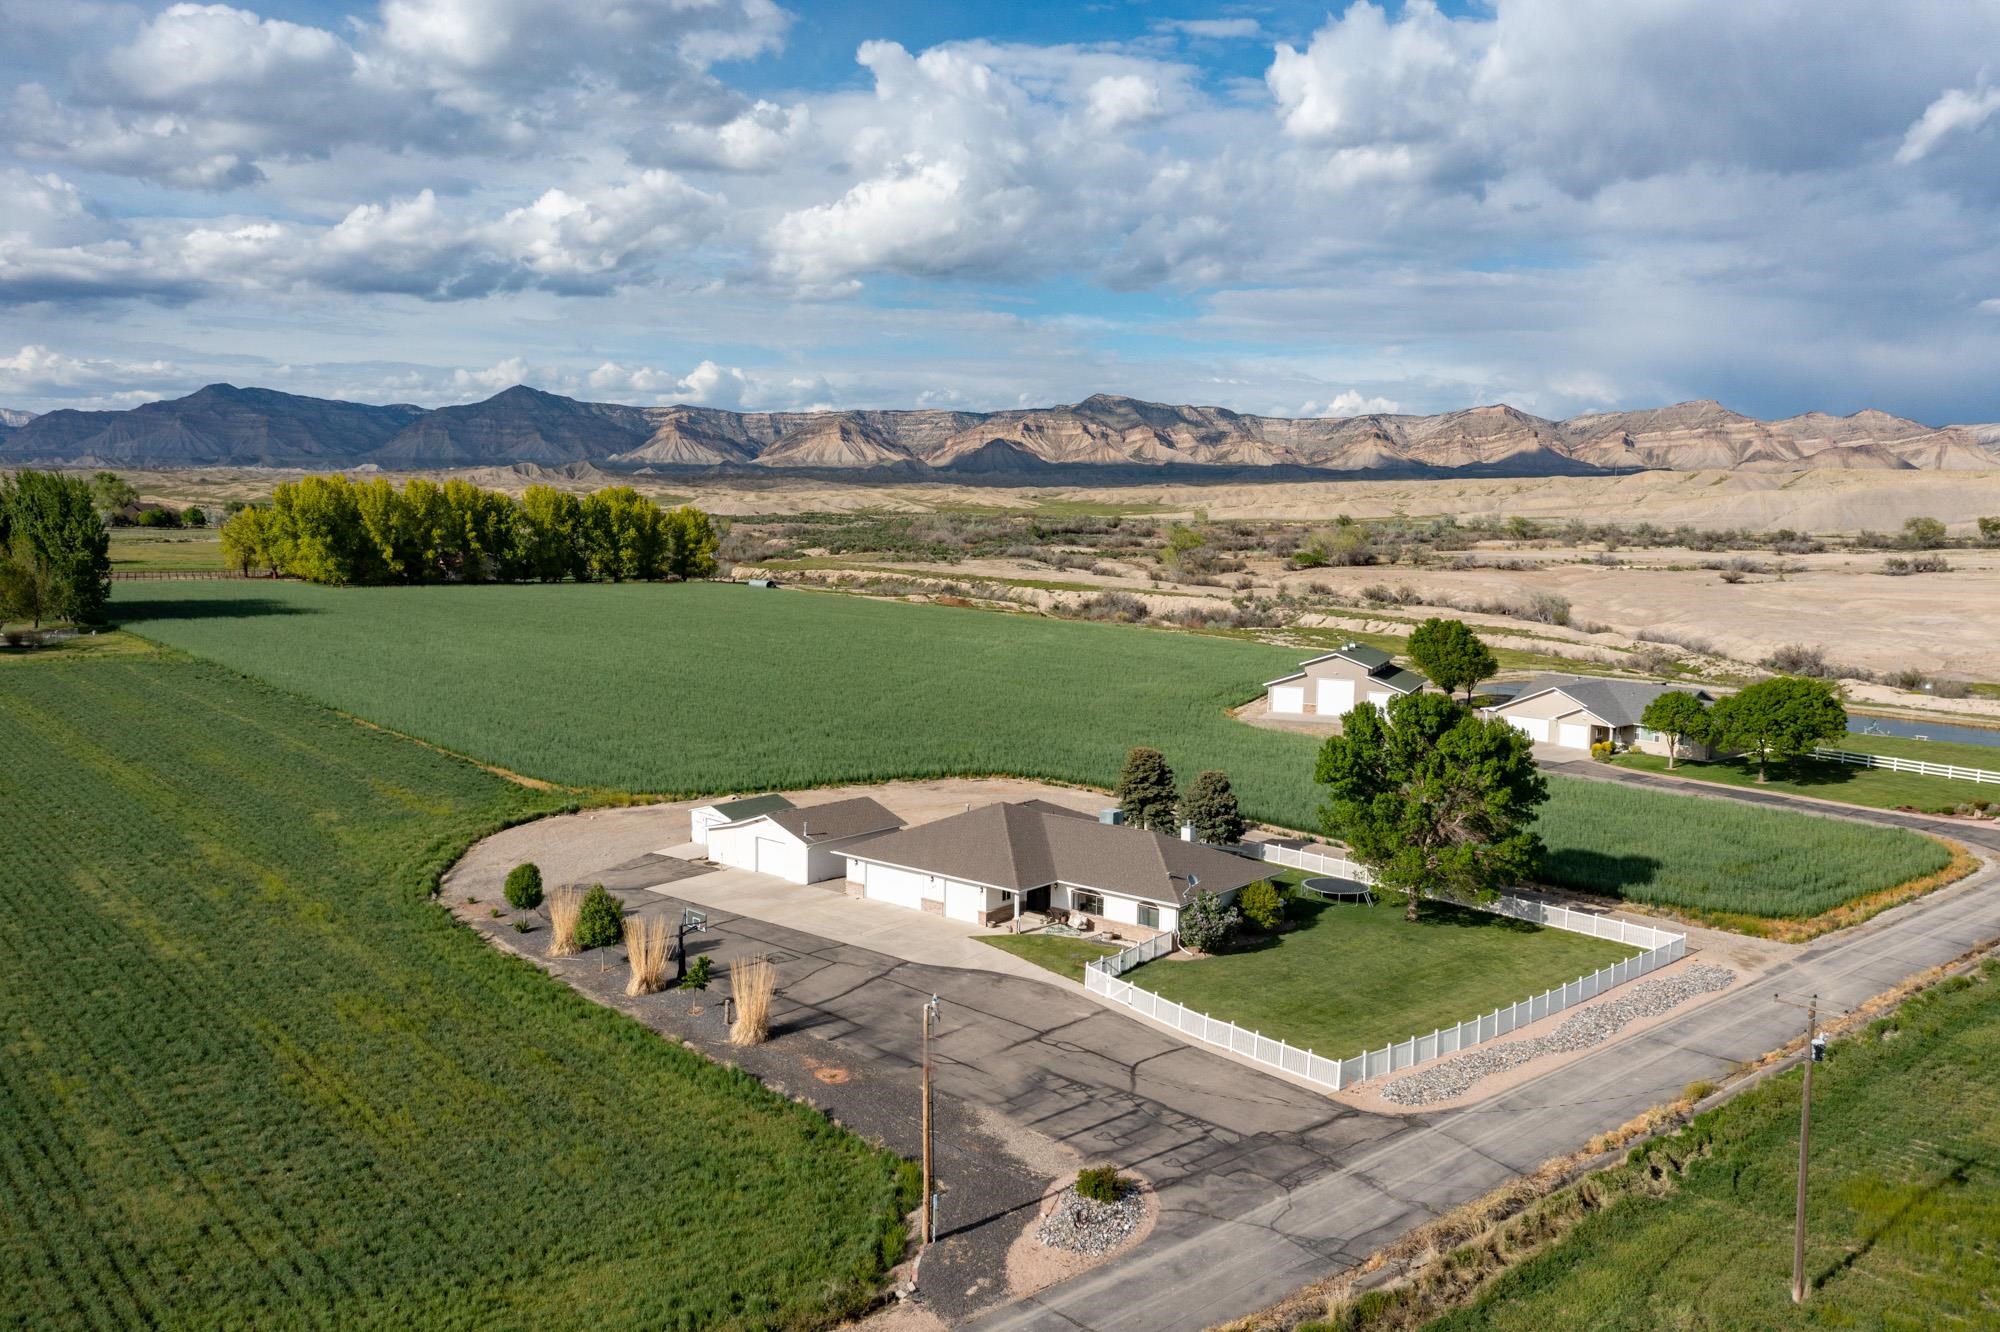 Nestled in the desirable North Grand Junction area, this stunning ranch style home sits on a three acre parcel surrounded by views in every direction. Updated in 2018 this home is sure to wow as soon as you walk through the front door. Smokey grey luxury vinyl plank flooring runs throughout this four bedroom home. An open floor plan makes this property an entertainers dream come true. Large windows line the living room and breakfast nook and they provide wonderful morning sunlight, making this home bright all year long. All the bedrooms in this home have great space to spread out, but the primary suite is exceptionally large and has its own gas log fireplace, builtin bookshelves, and a five-piece bathroom on-suite.  Outside you'll find a wonderful covered patio with exterior fans for those hot summer afternoons. You'll be eager to cool your feet in the thick green grass that surrounds most of the property, which is fully enclosed by a white vinyl picket fence. An alfalfa field to the north of the property is currently being maintained by a third party but could be harvested and sold/used by the new owner. This property is also a short distance from BLM, and has a large workshop to store whatever your heart desires. Don't let your dream home slip away, schedule a private showing today!